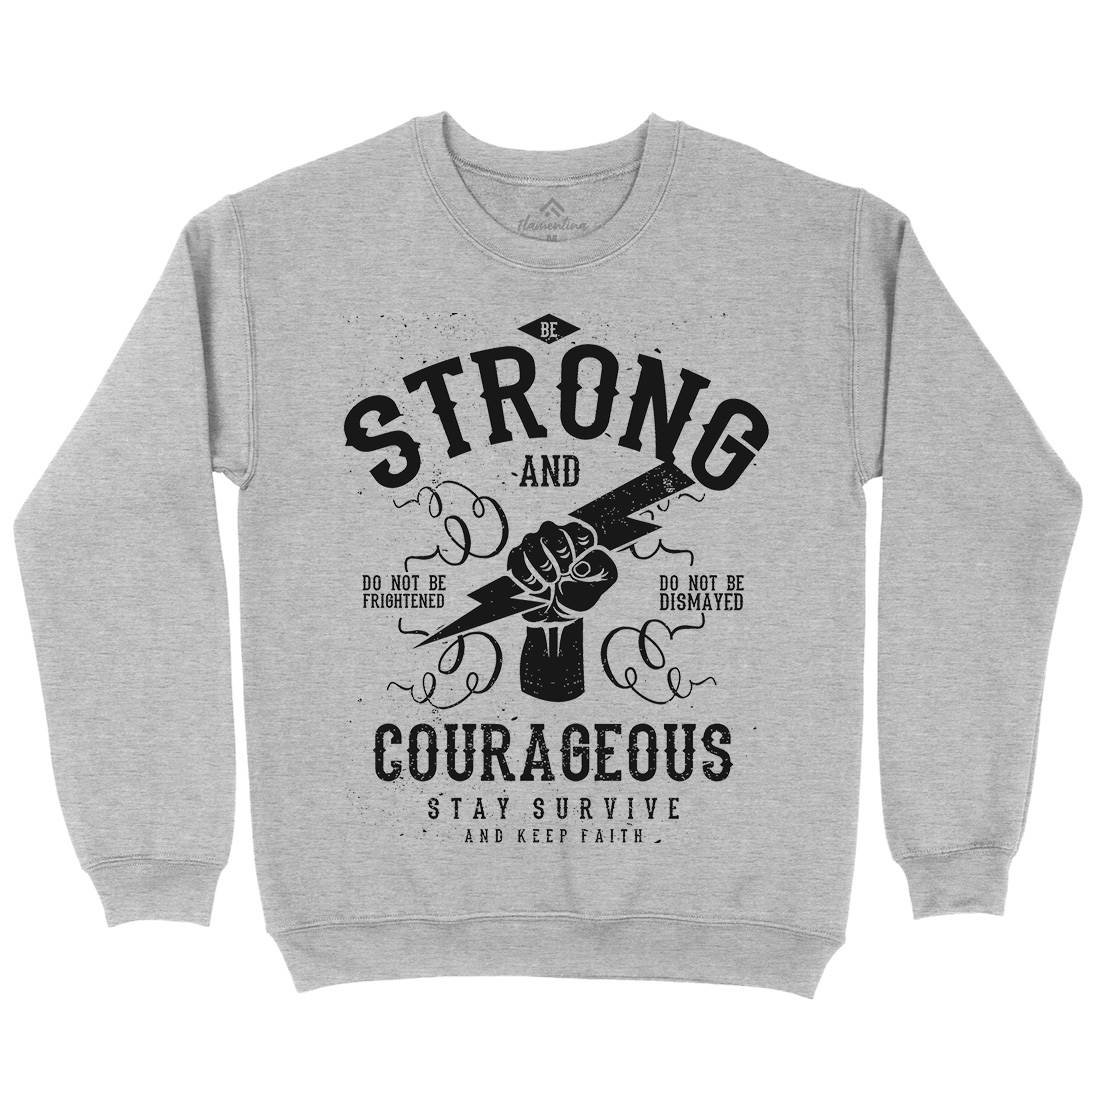 Be Strong And Courageous Kids Crew Neck Sweatshirt Quotes A101